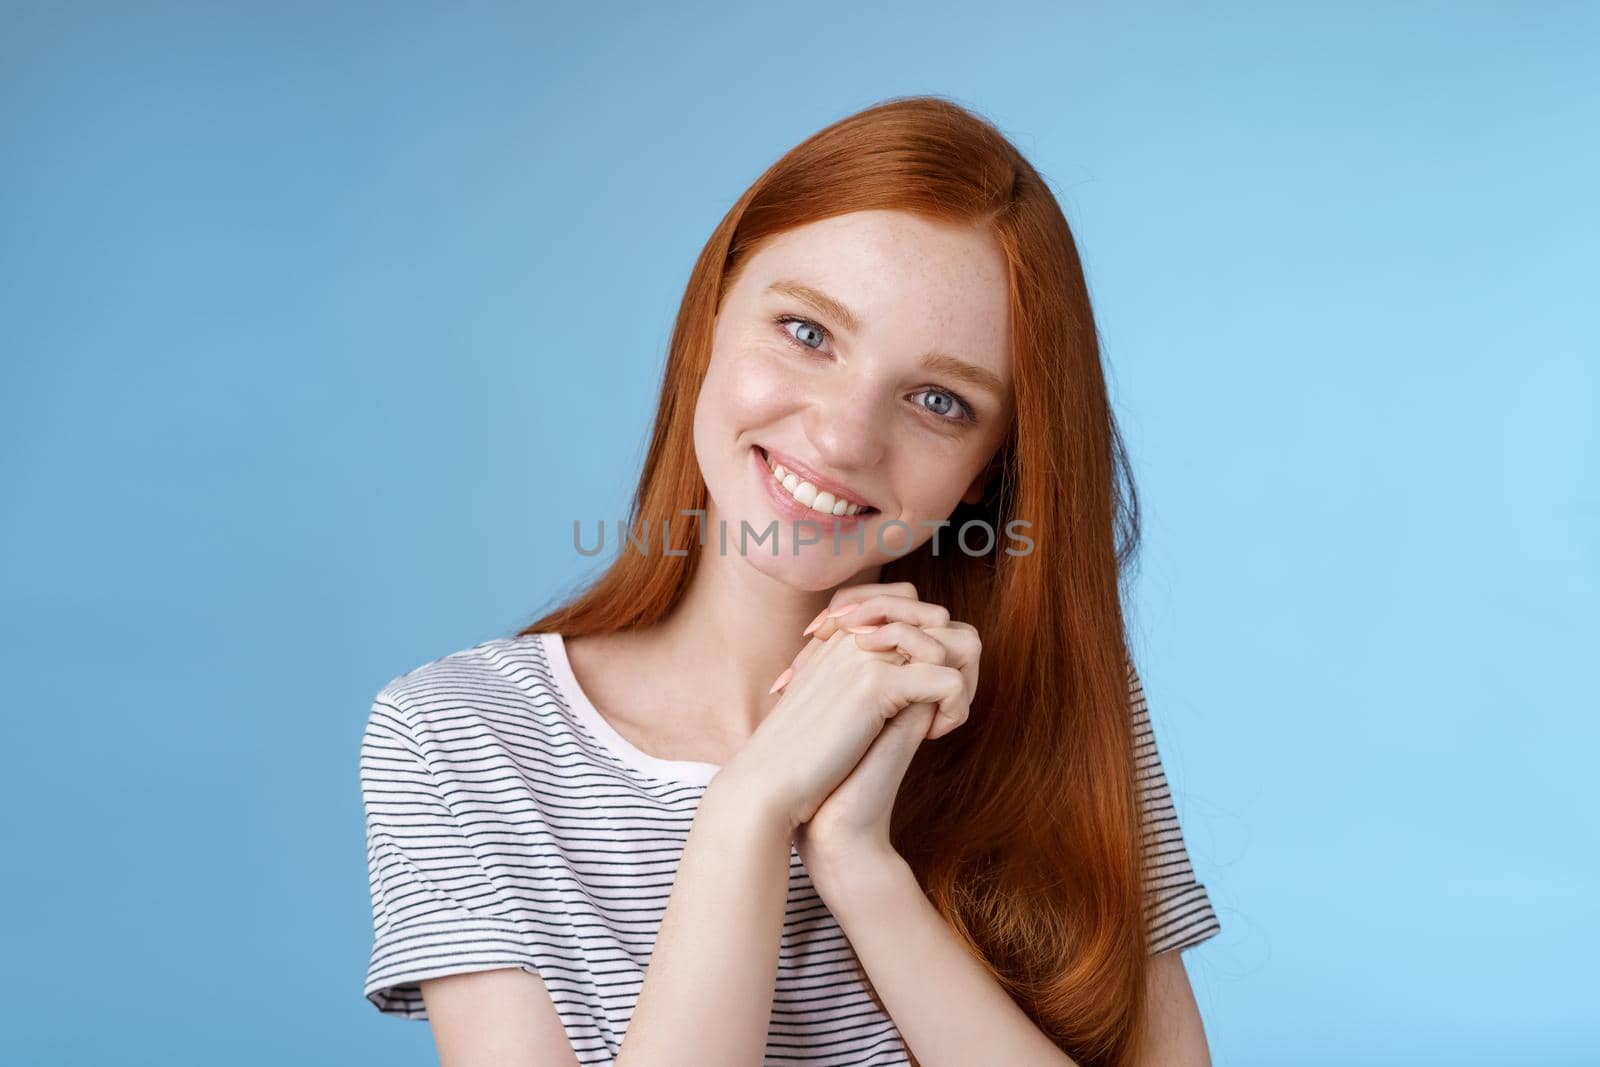 Romantic tender lovely redhead girlfriend tilting head press palms together smiling touched look sympathy check out cute picture friend standing delighted amused, heartwarming moment.